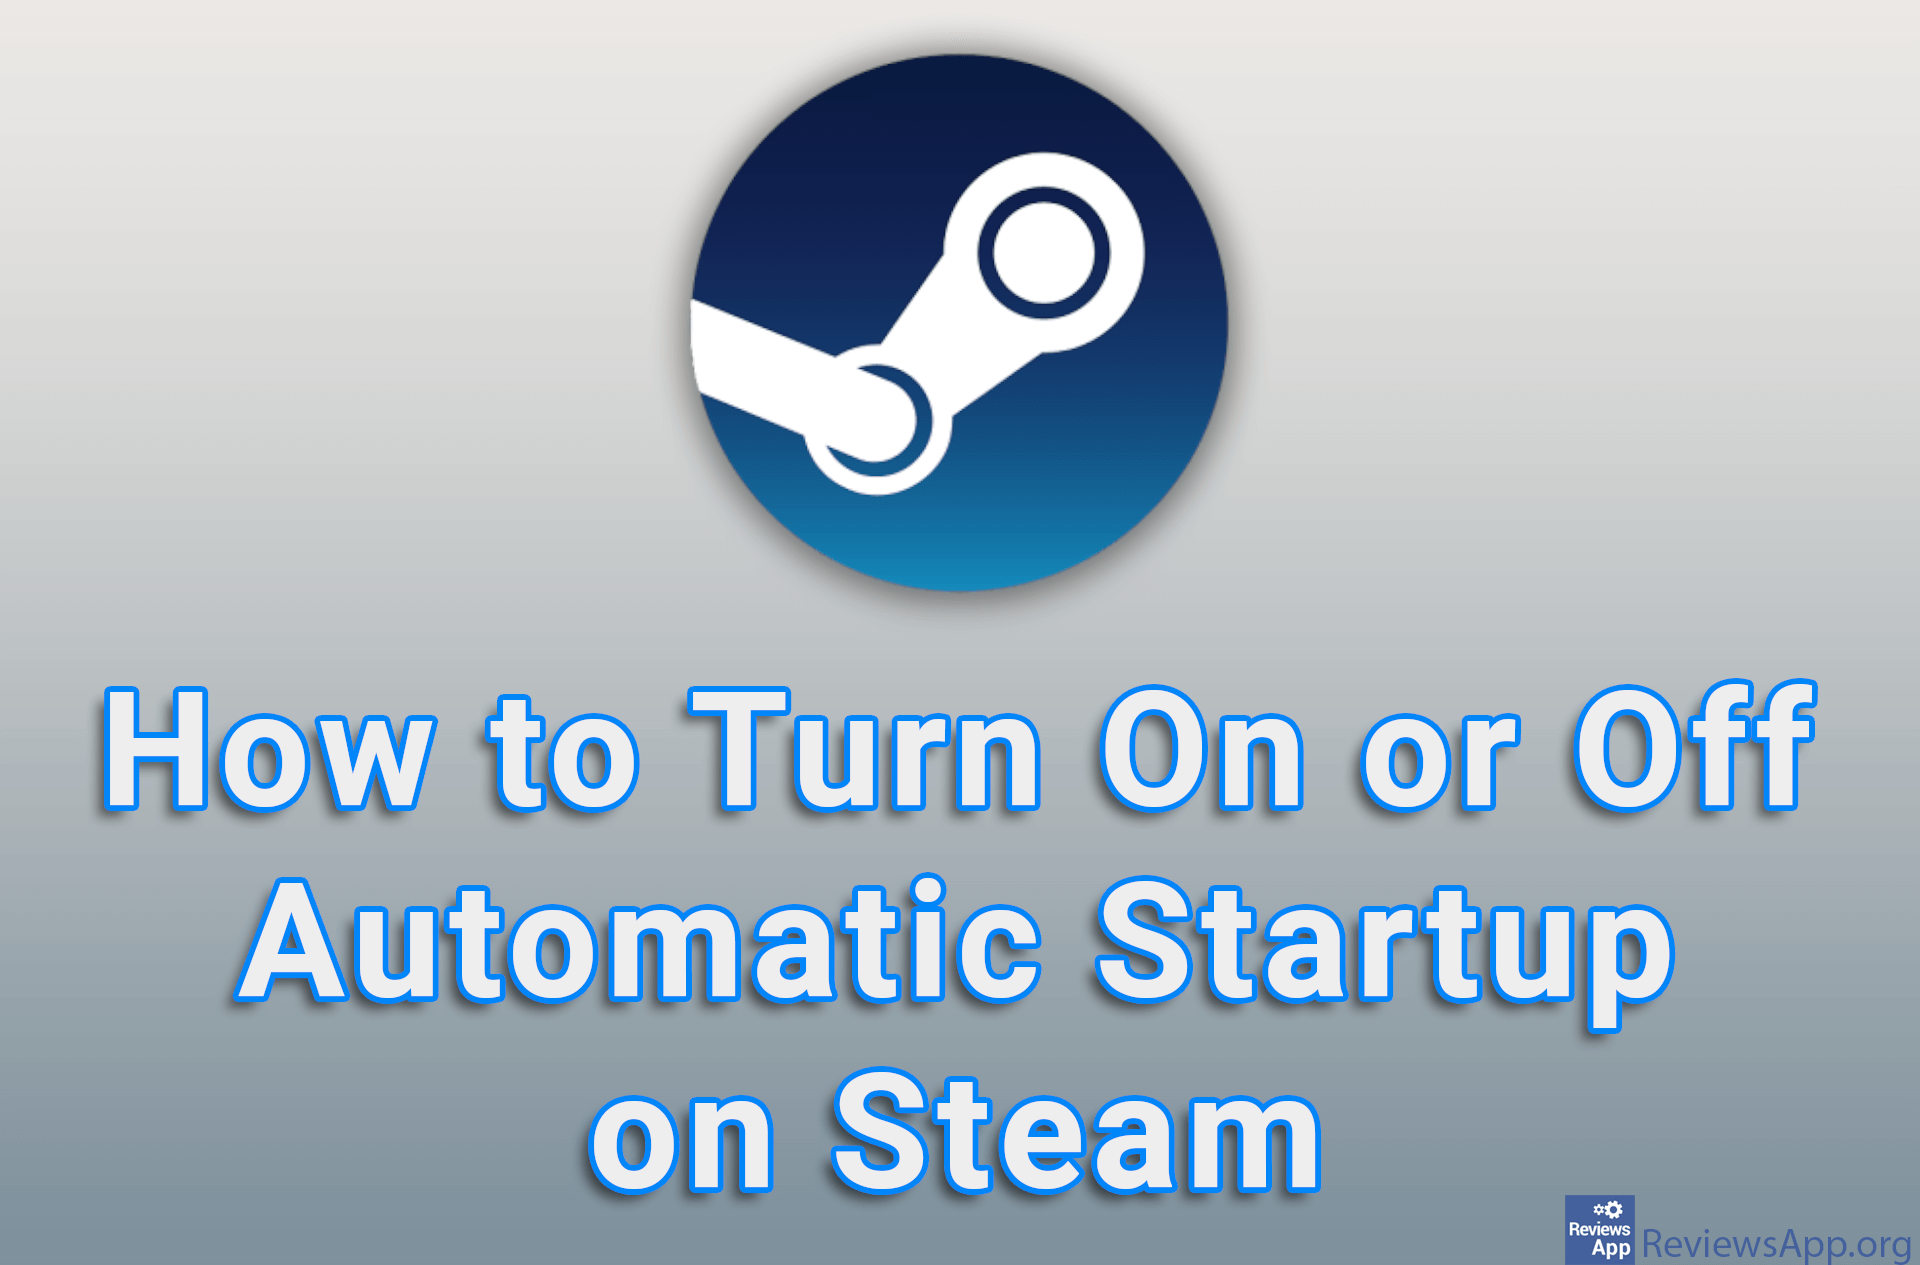 How to Turn On or Off Automatic Startup on Steam